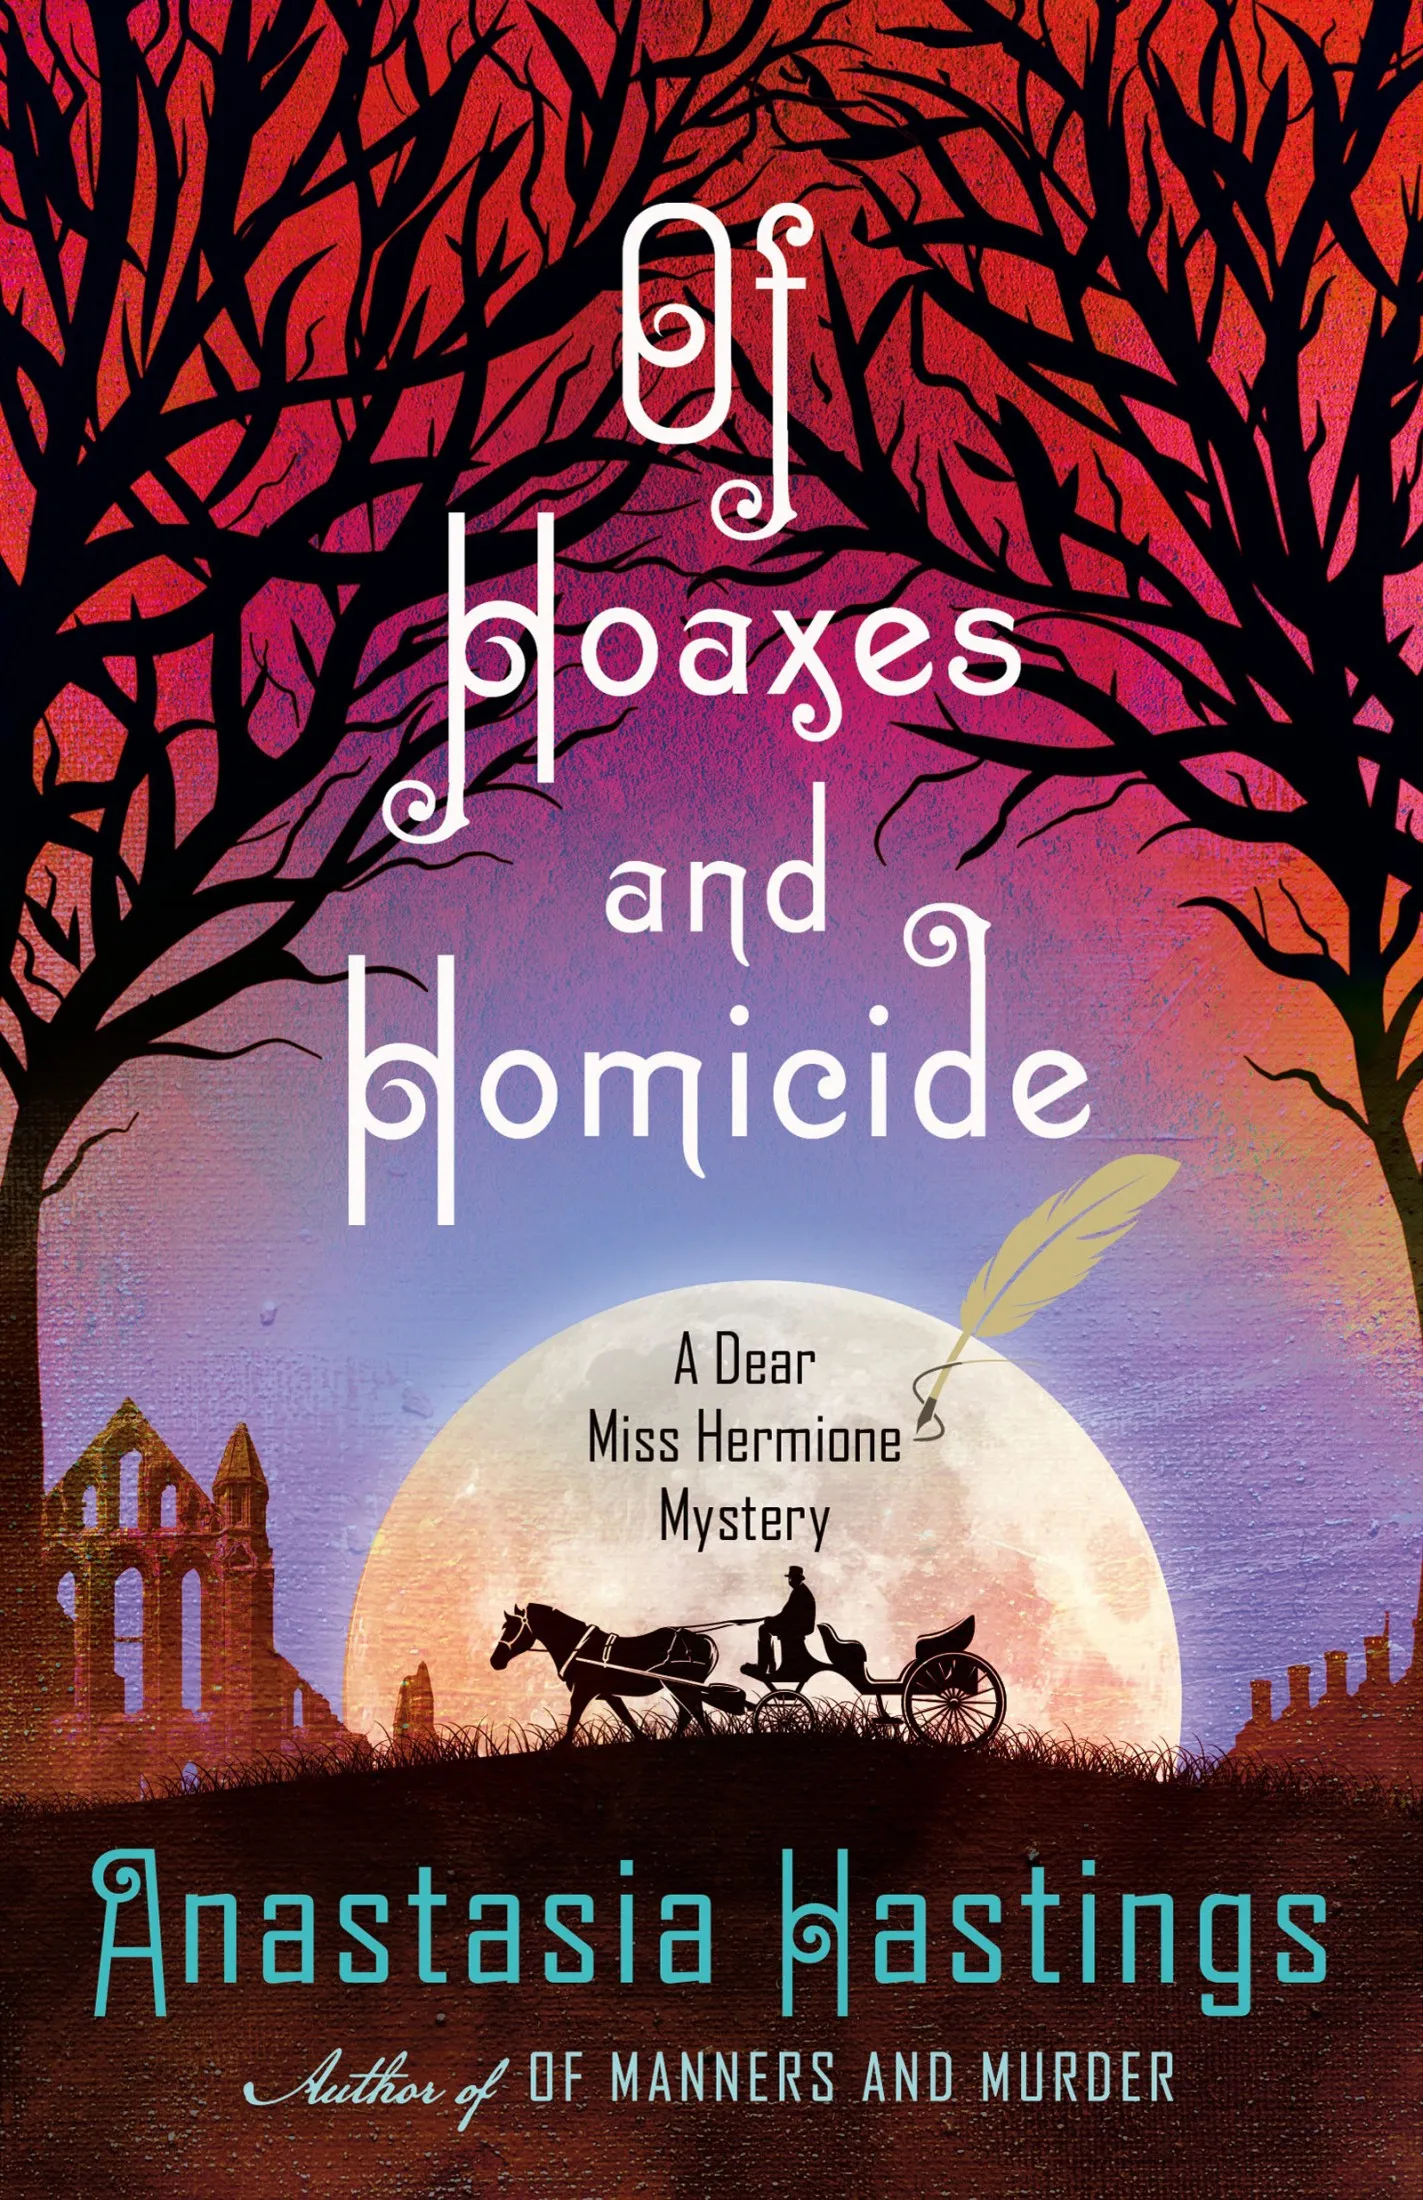 Of Hoaxes and Homicide (A Dear Miss Hermione Mystery #2)